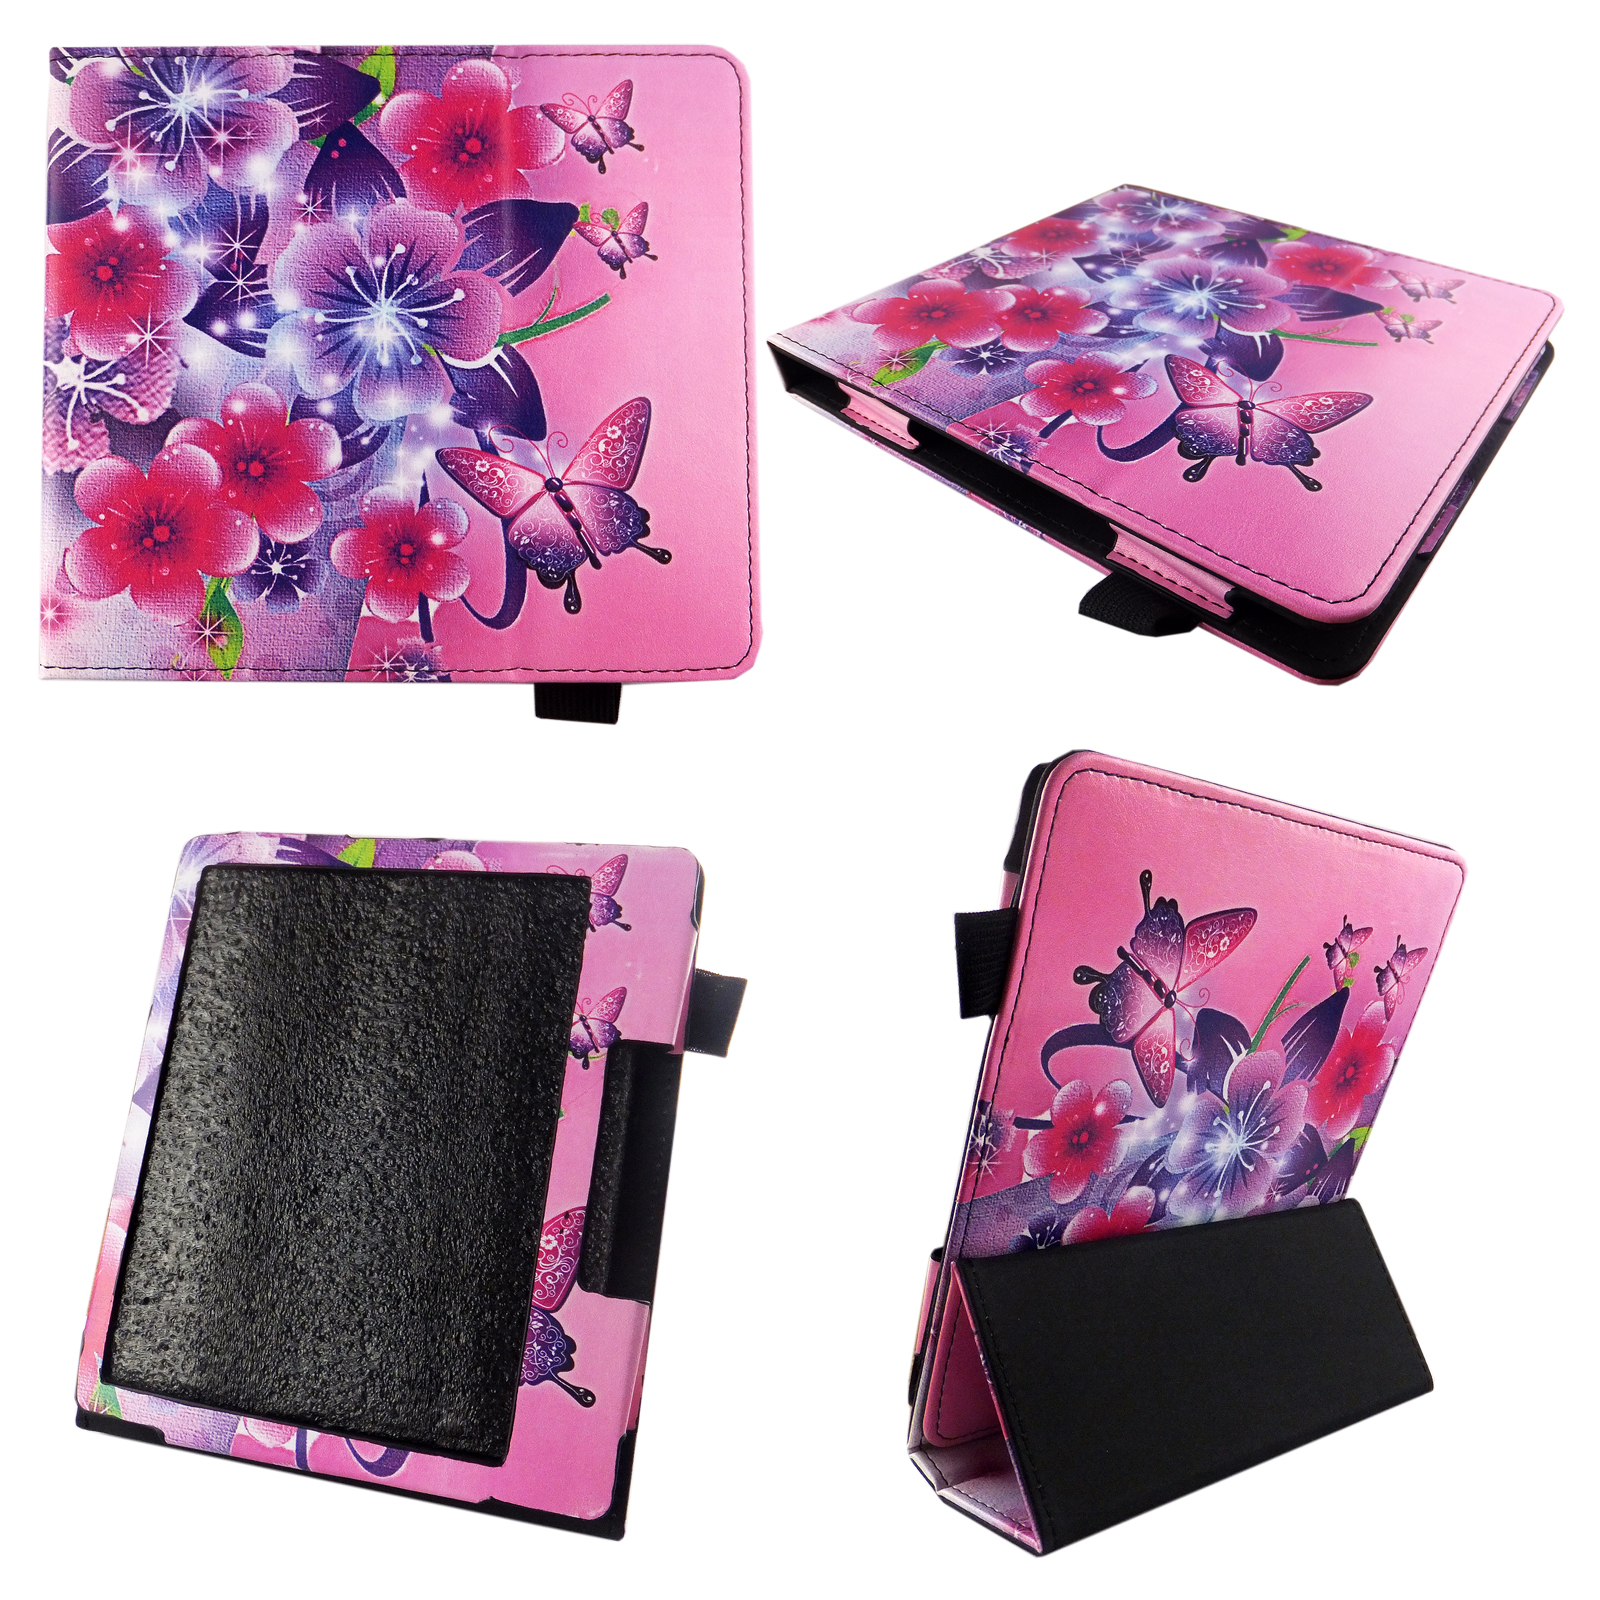 Butterfly Flower Pink Case for All-New Kindle Oasis 7 Inch (9th Gen, 2017 Release) - Premium Lightweight PU Leather Slim Sleeve Cover Auto Sleep/Wake for Amazon Kindle Oasis 2017 E-Reader with Stylus - image 1 of 2